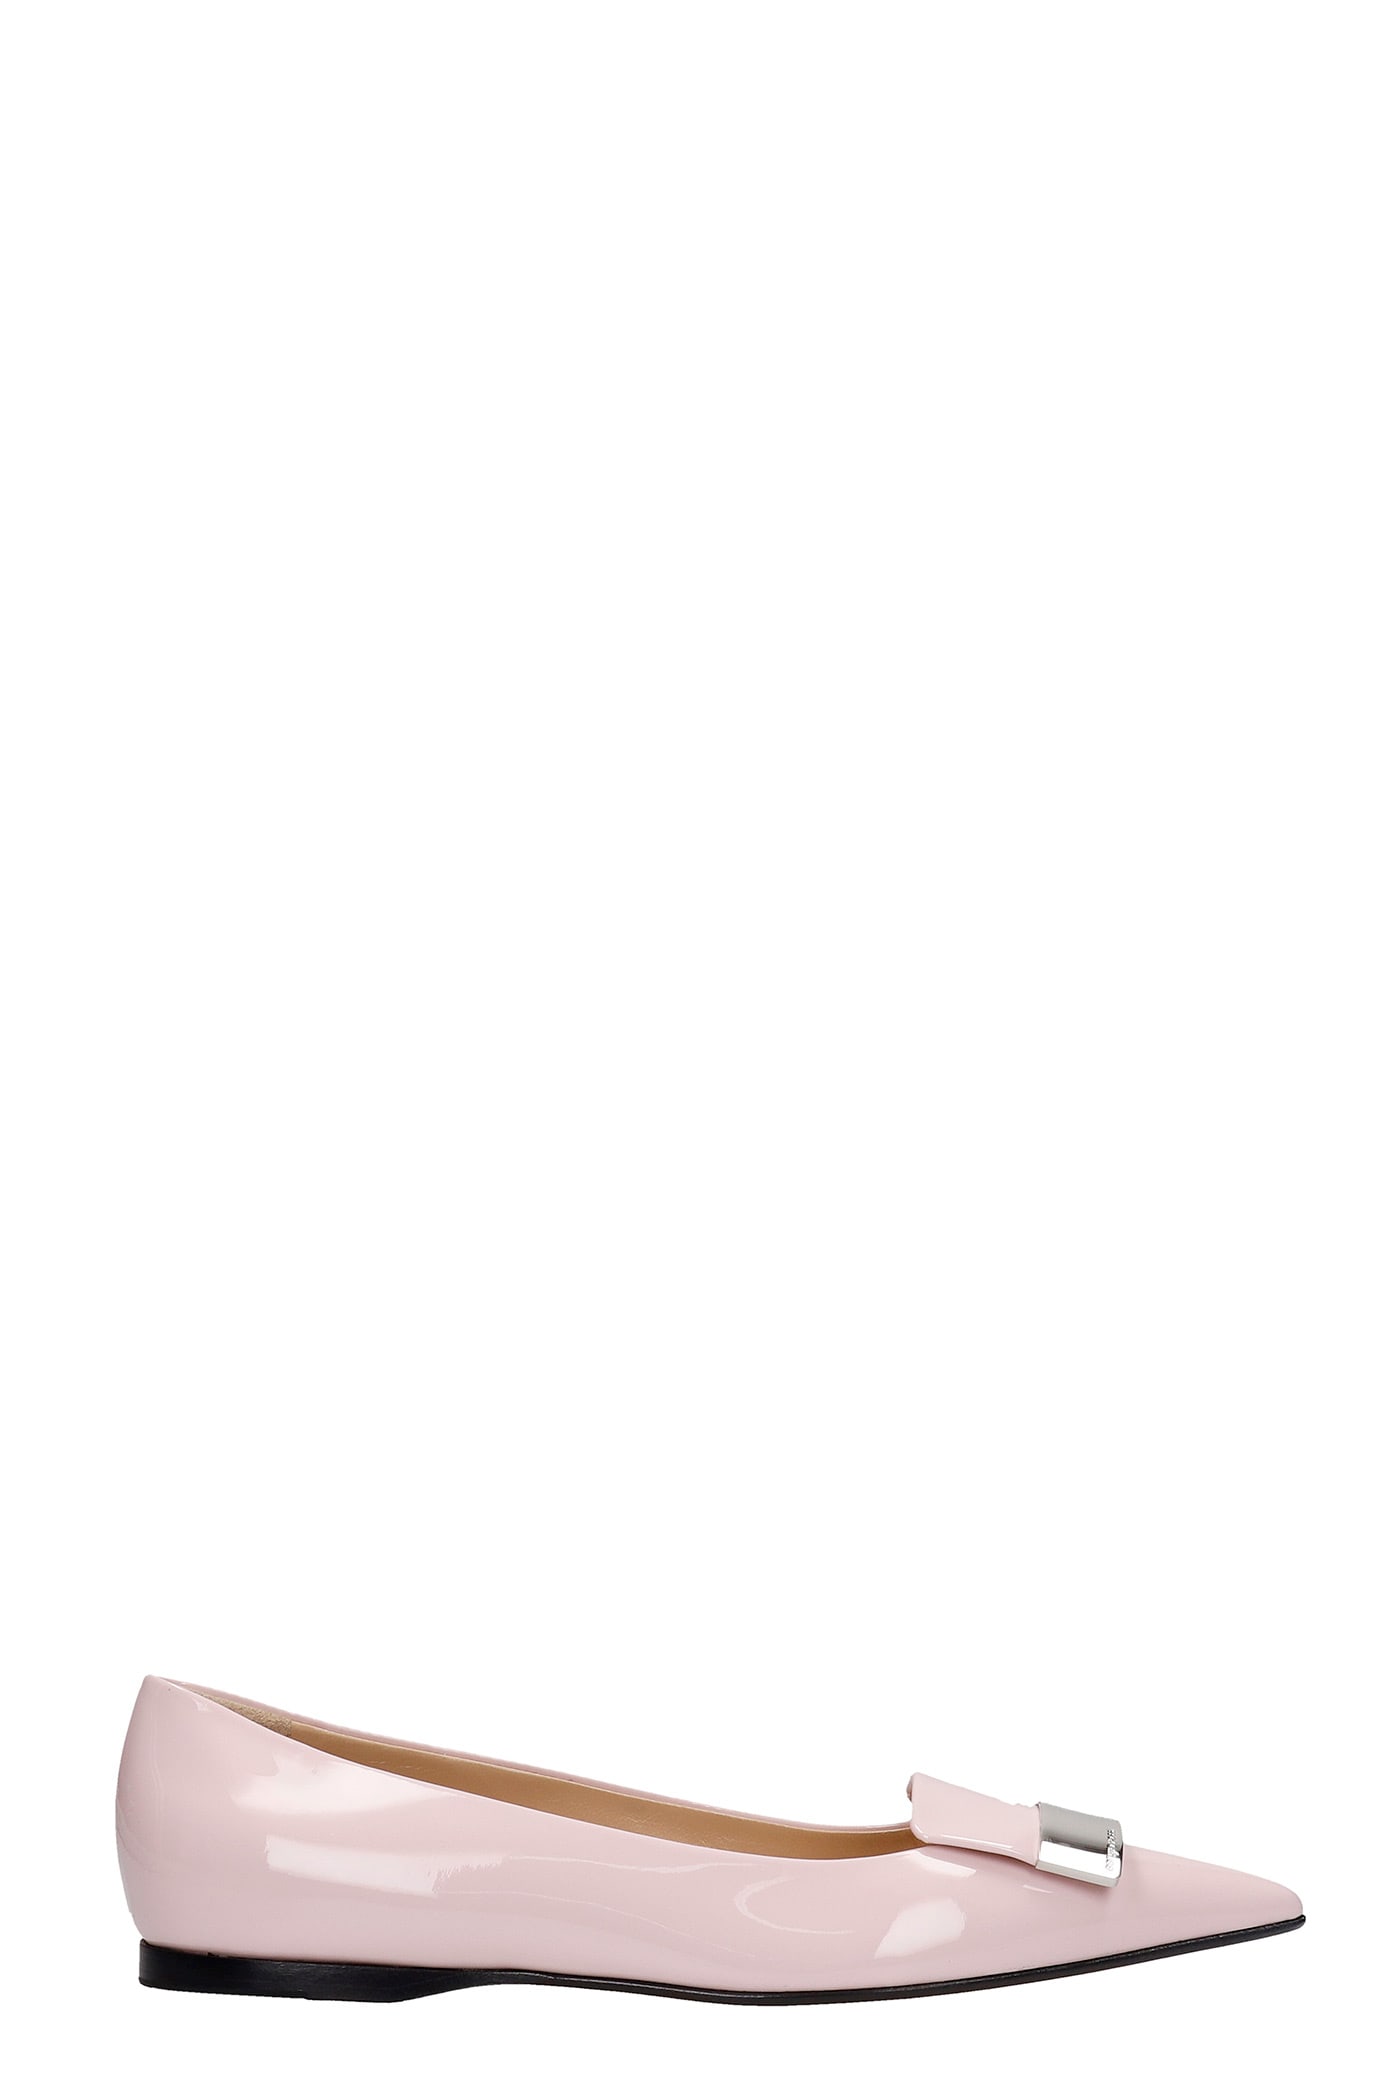 Buy Sergio Rossi Ballet Flats In Rose-pink Patent Leather online, shop Sergio Rossi shoes with free shipping